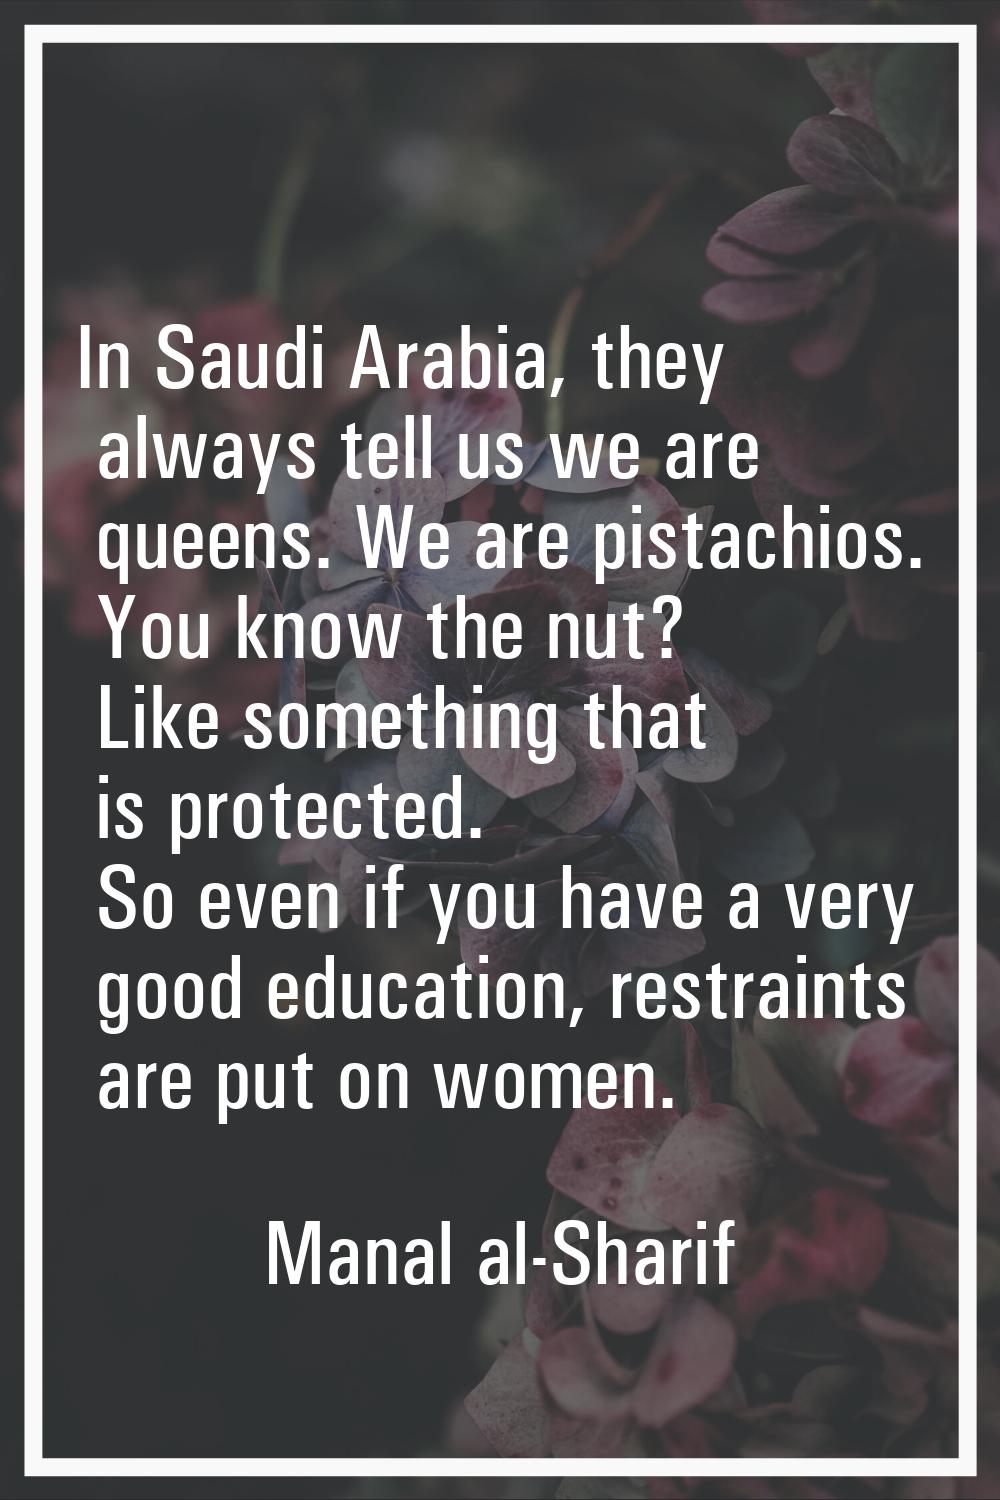 In Saudi Arabia, they always tell us we are queens. We are pistachios. You know the nut? Like somet